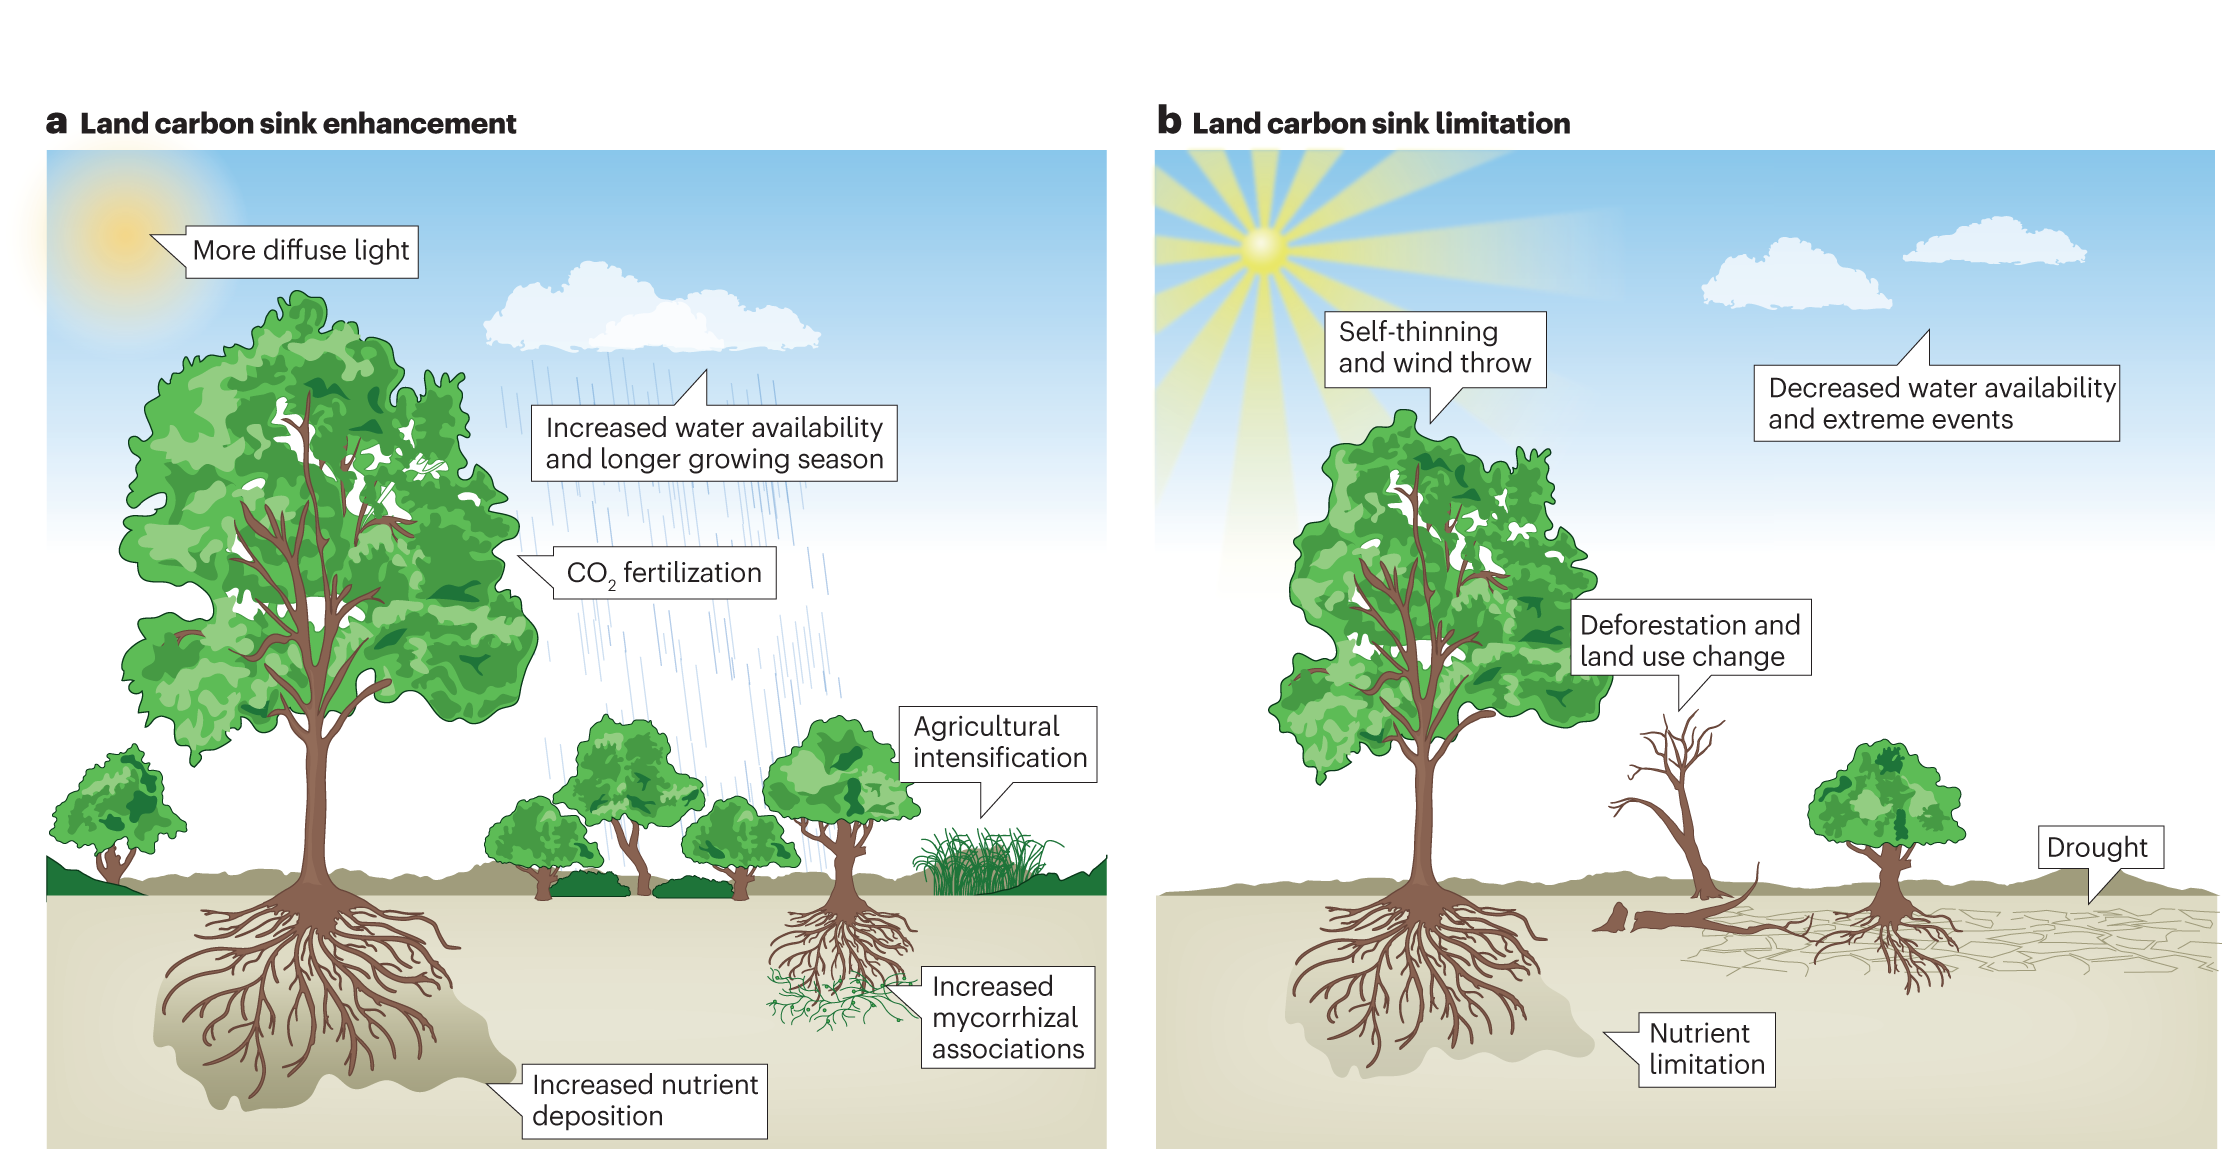 A side-by-side schematic representation of the processes enhancing the land carbon sink (left) and the processes limiting the net land carbon sink (right)